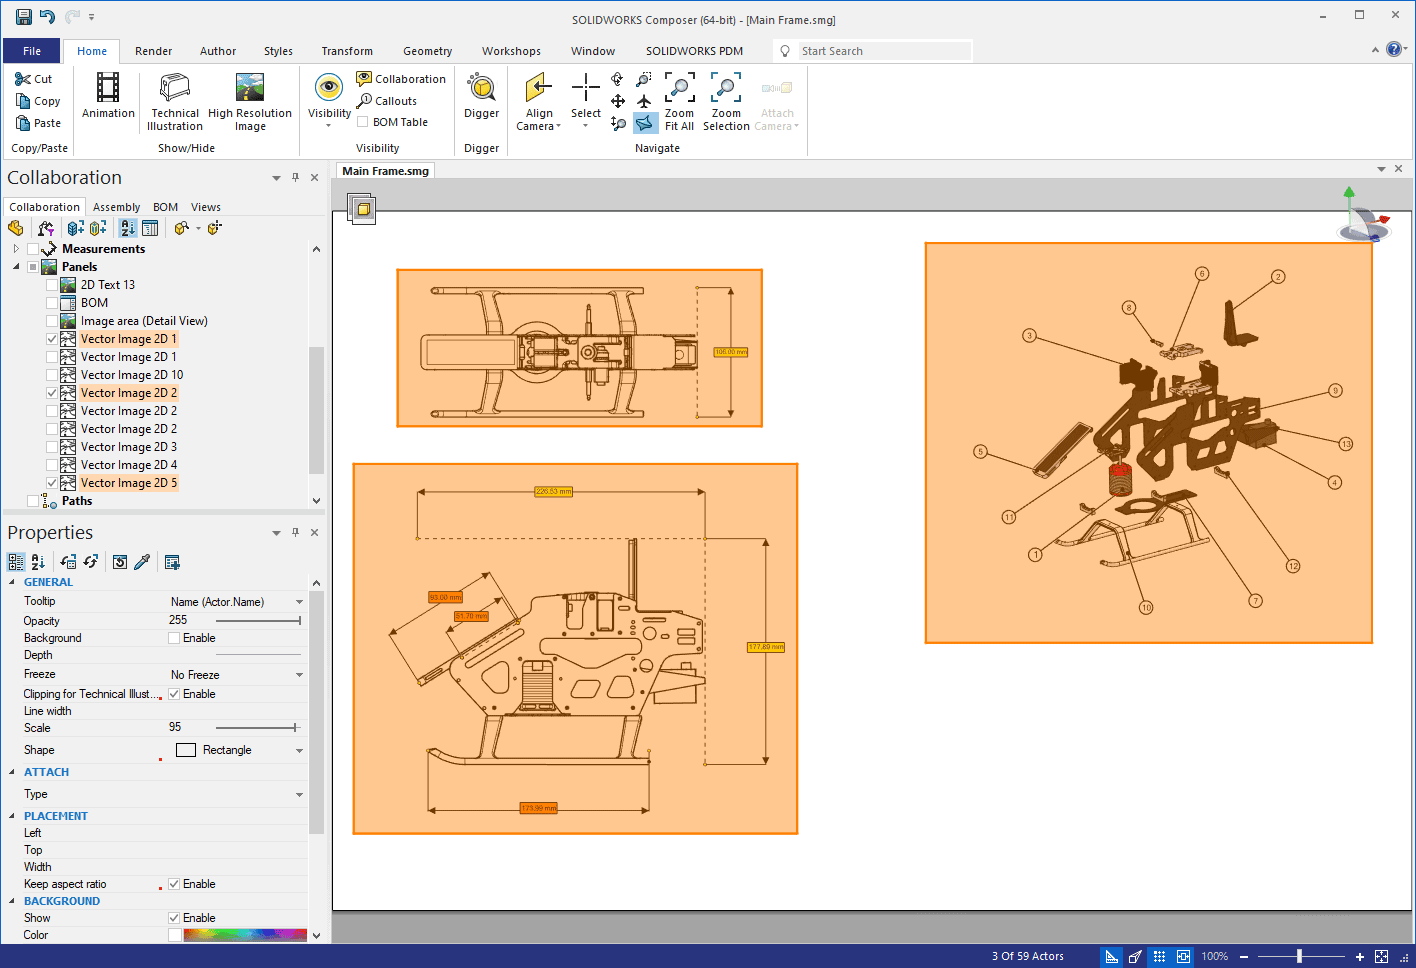 emulate drawiings solidworks composer, Emulating Drawings in SOLIDWORKS Composer?